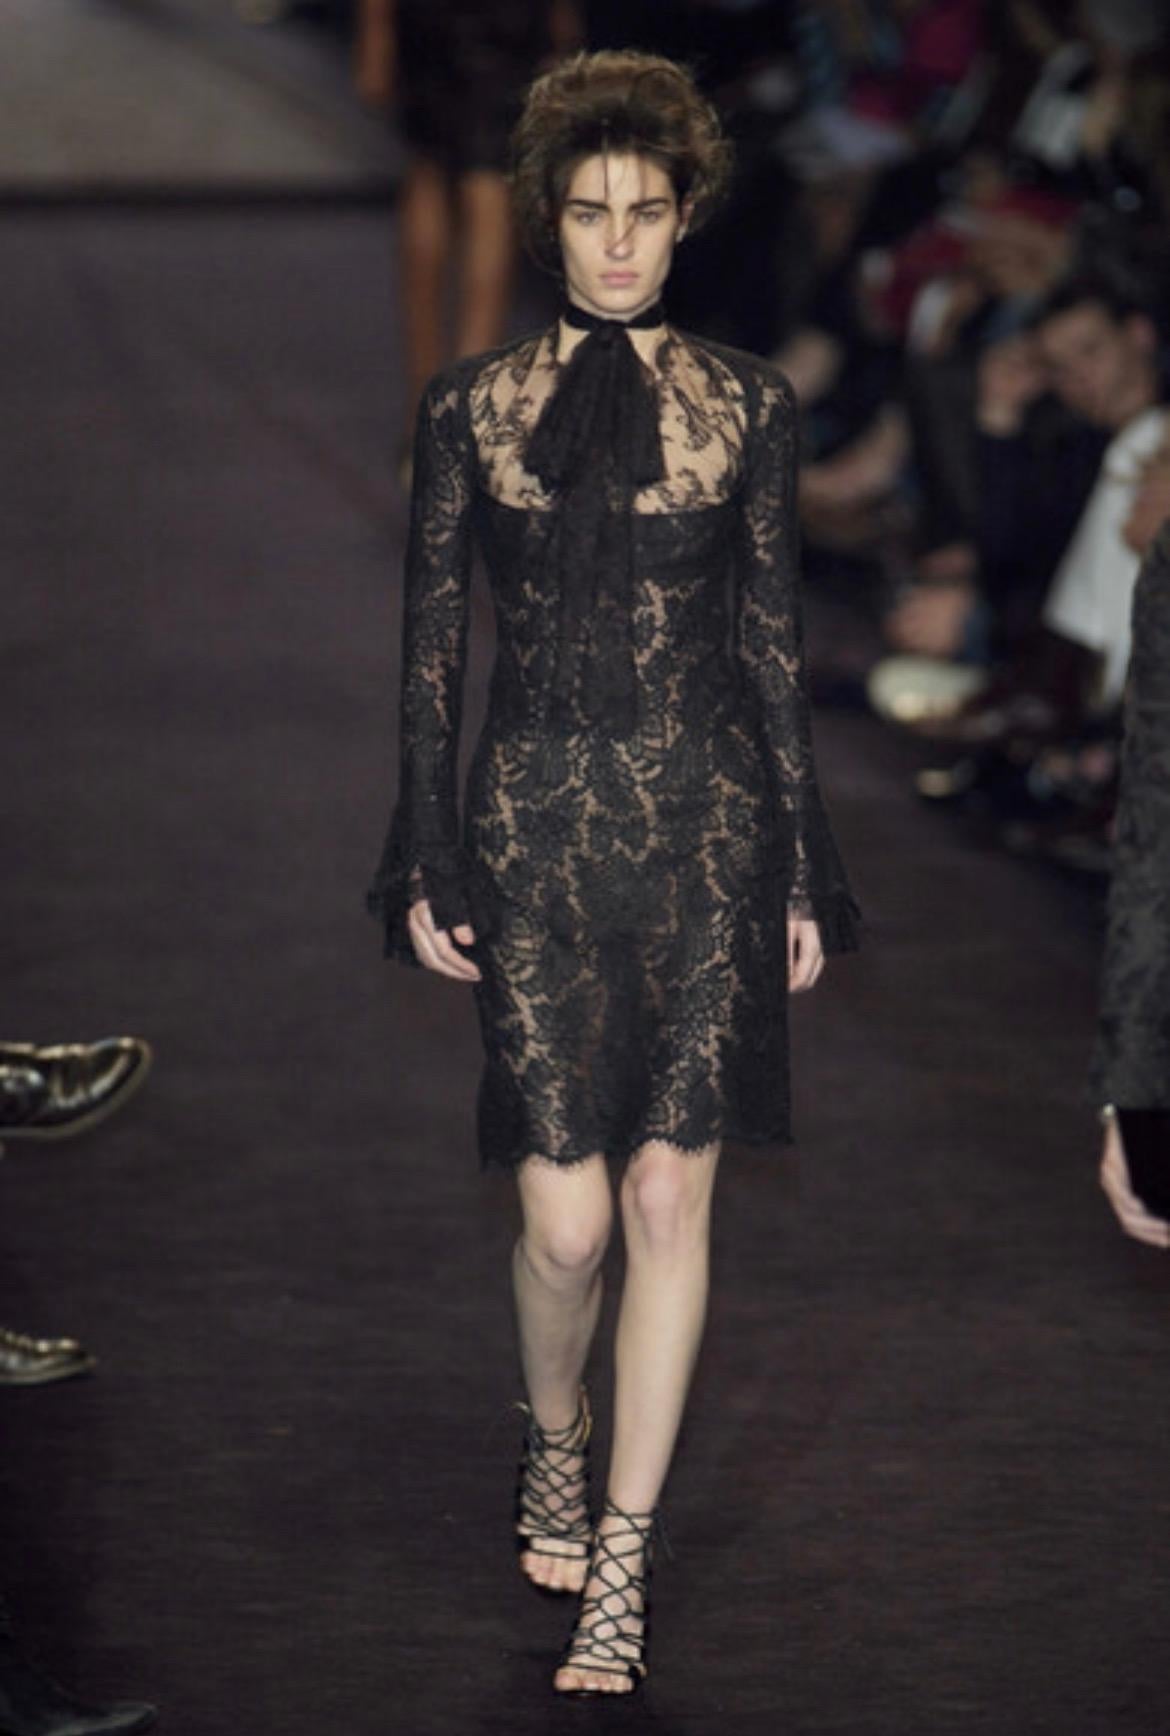 Presenting a gorgeous black lace Yves Saint Laurent Rive Gauche dress, designed by Tom Ford. From the Fall/Winter 2002 collection, this dress debuted on the season's runway as look 33 modeled by Amanda Moore. This incredible baby doll-style dress is